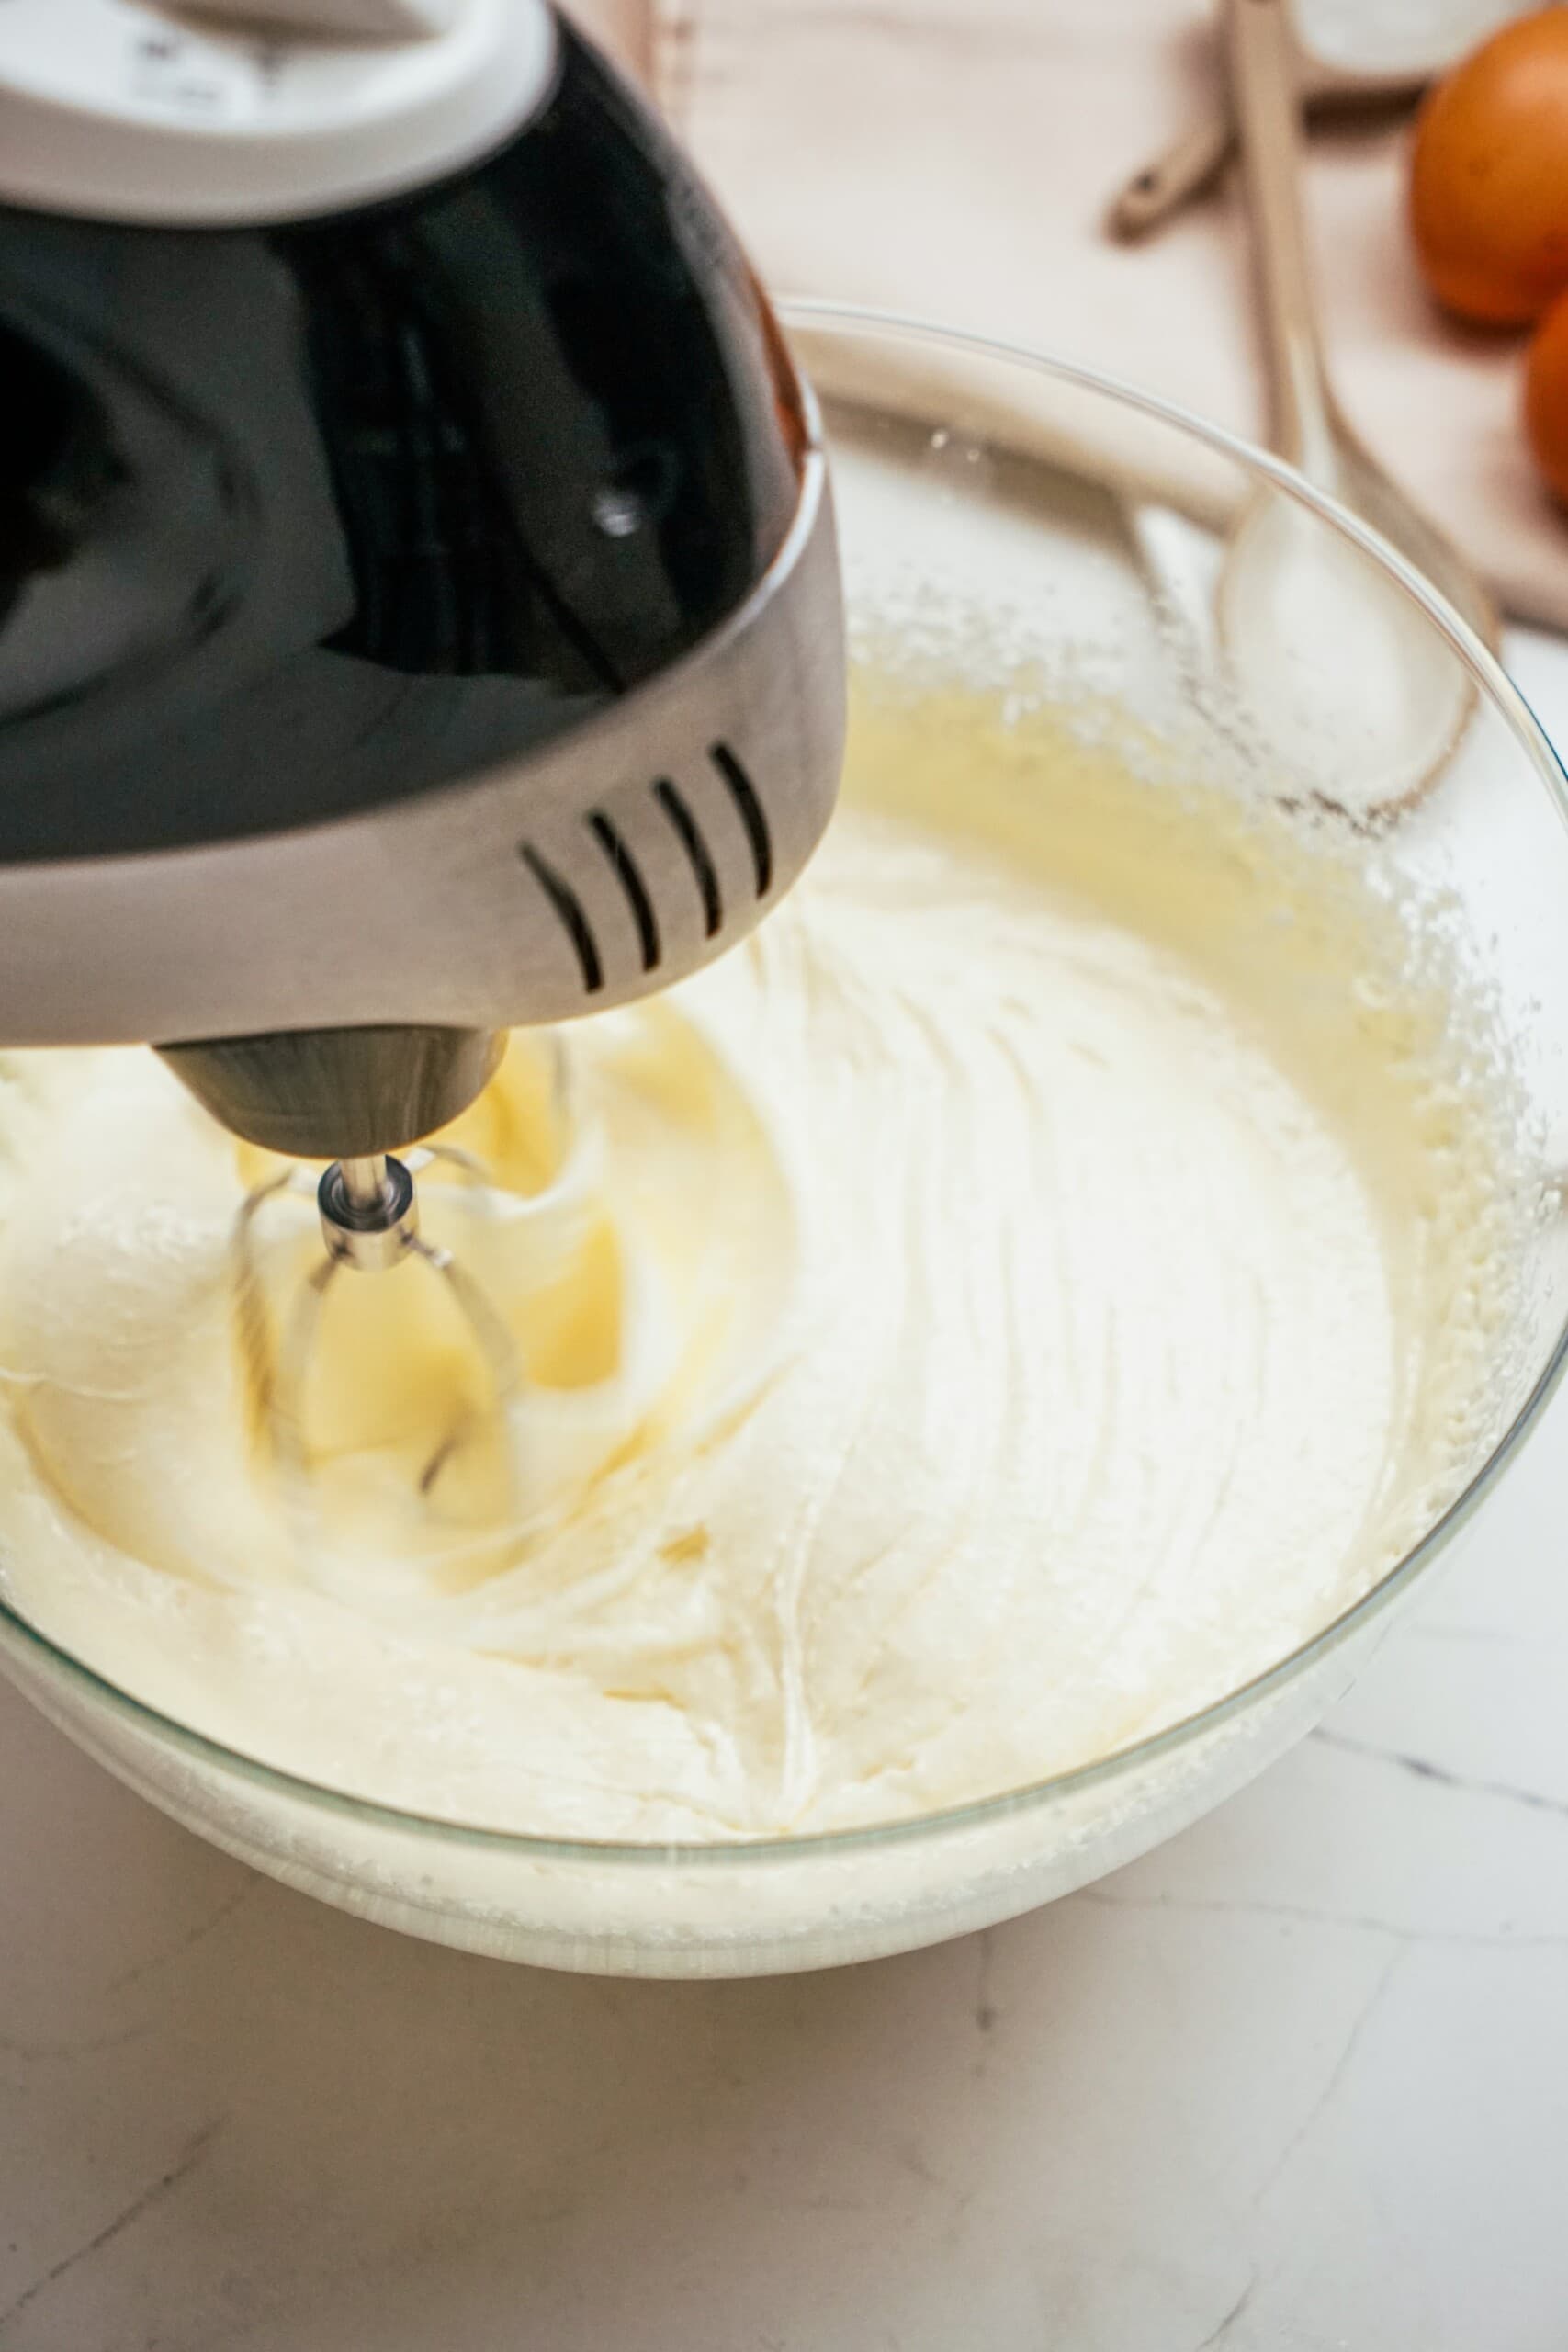 mixing cake batter with electric mixer